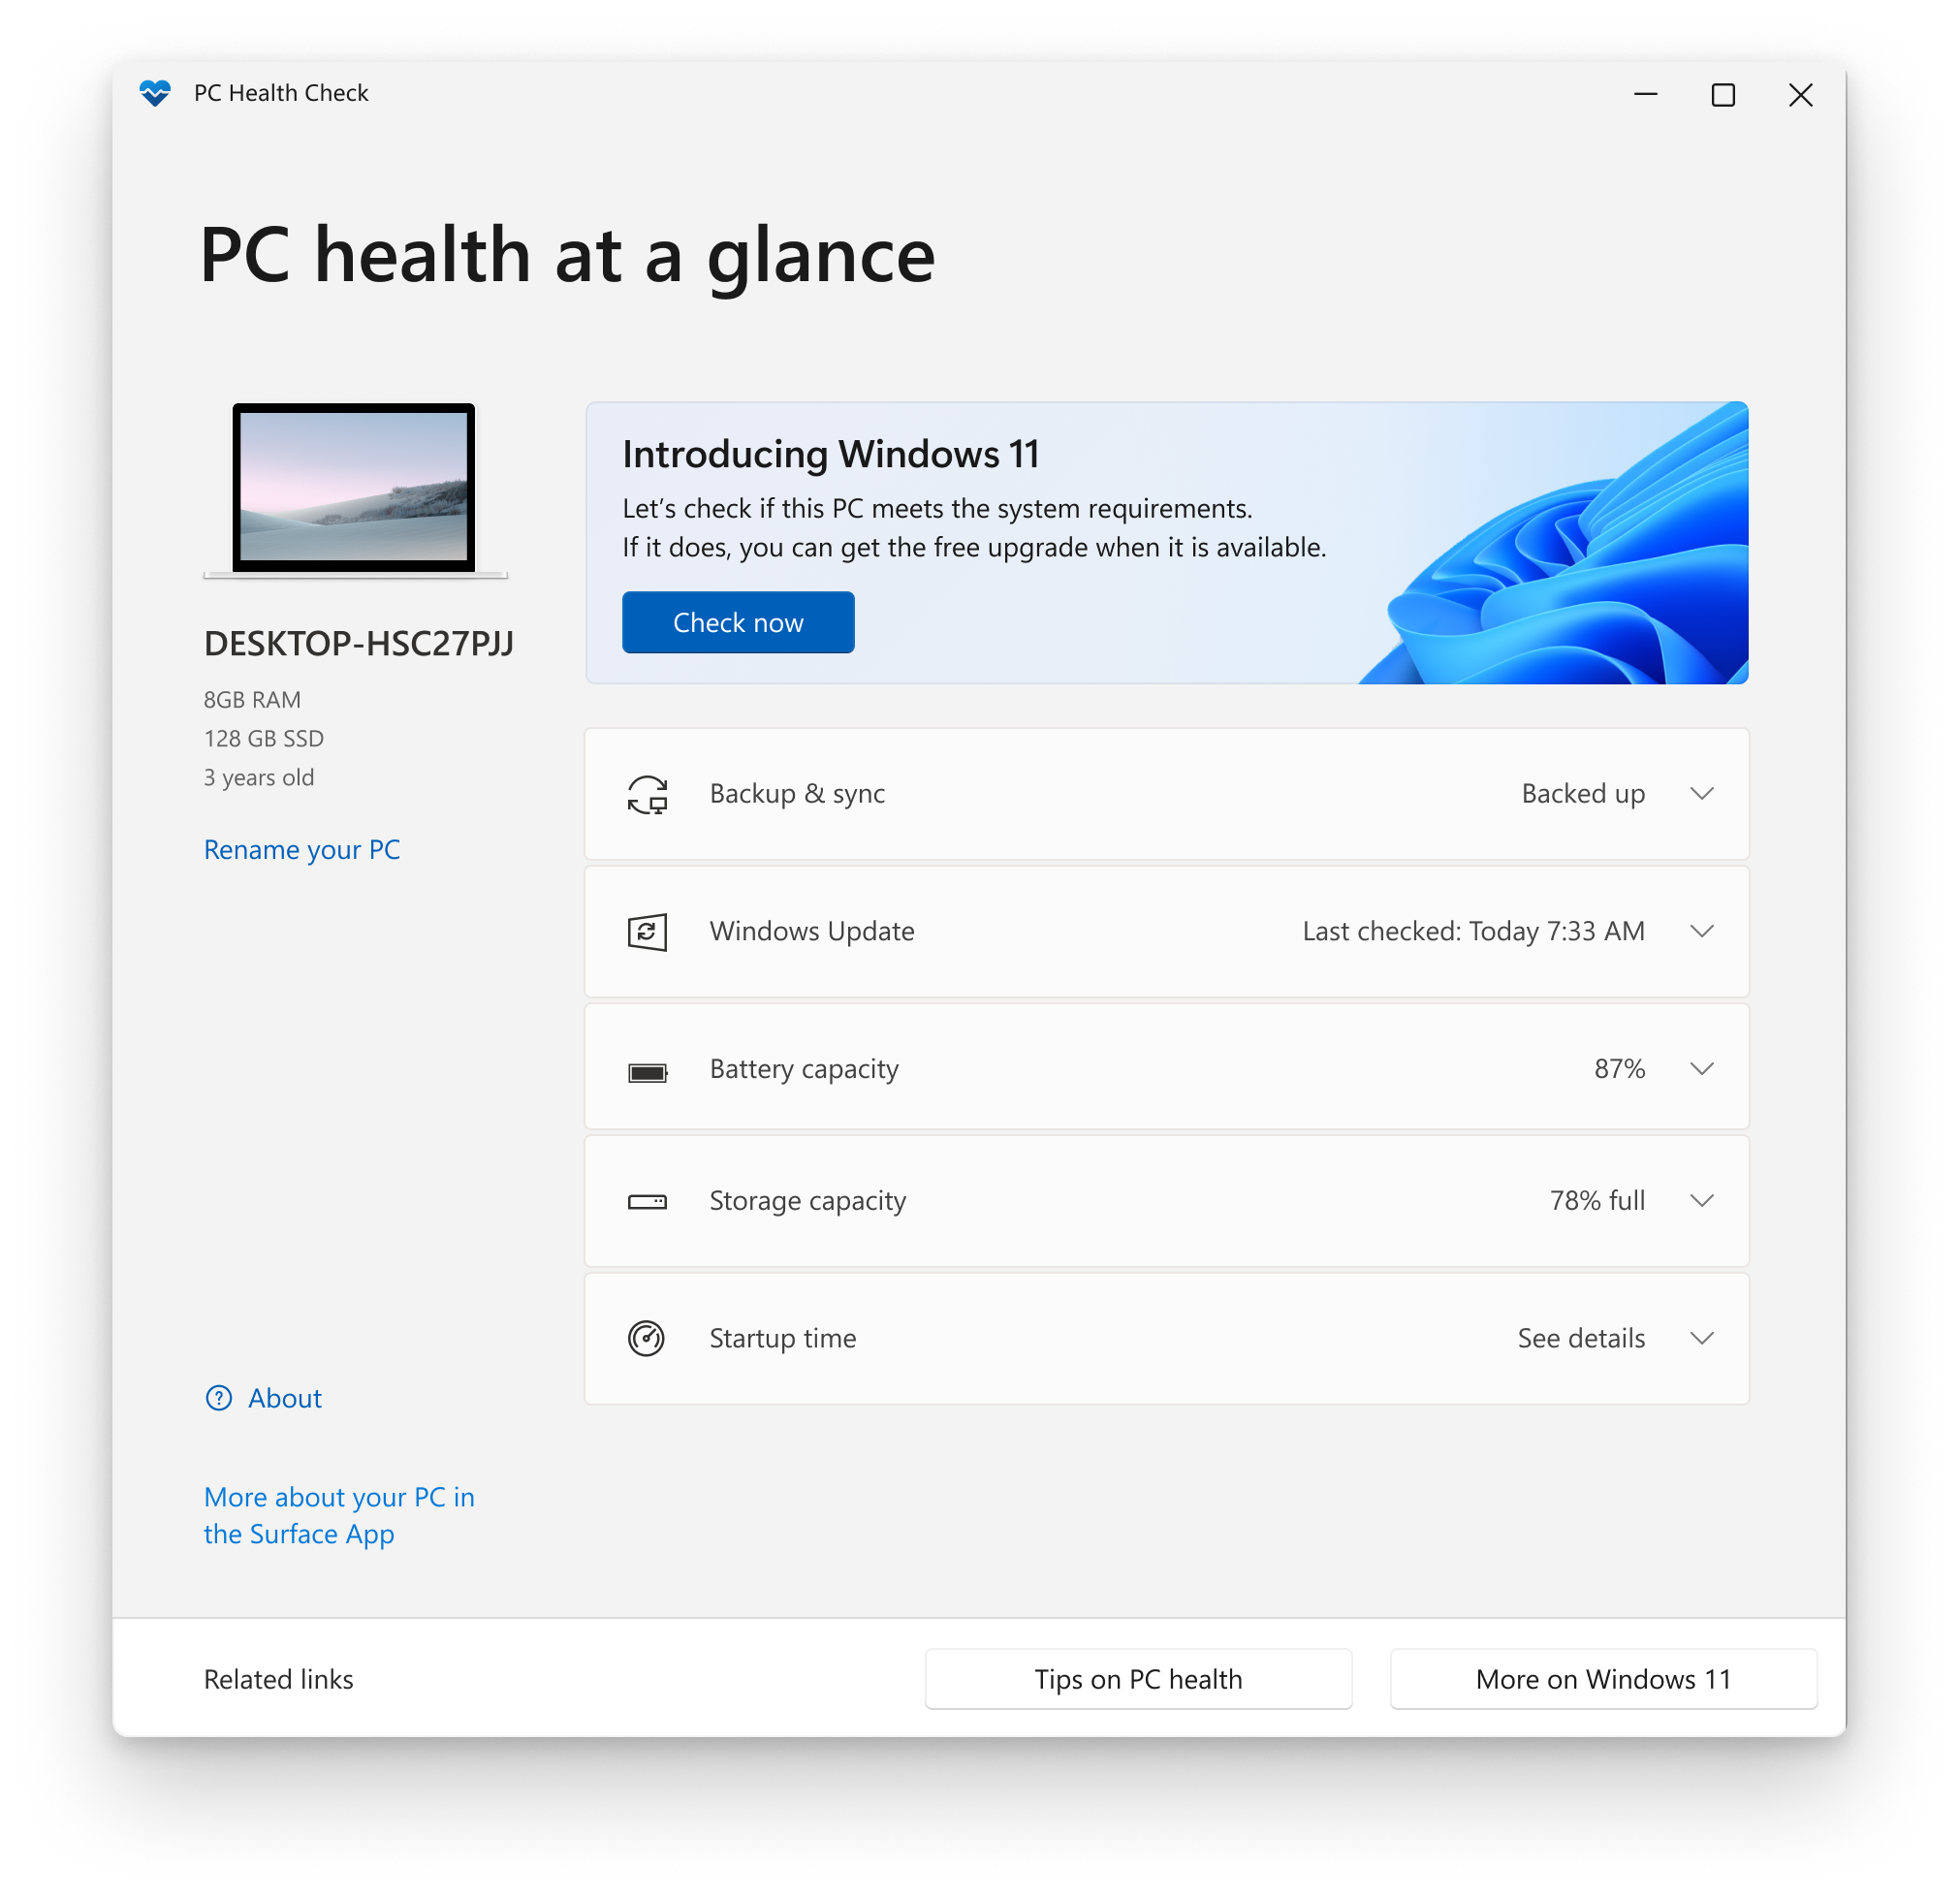 how to download the pc health check app